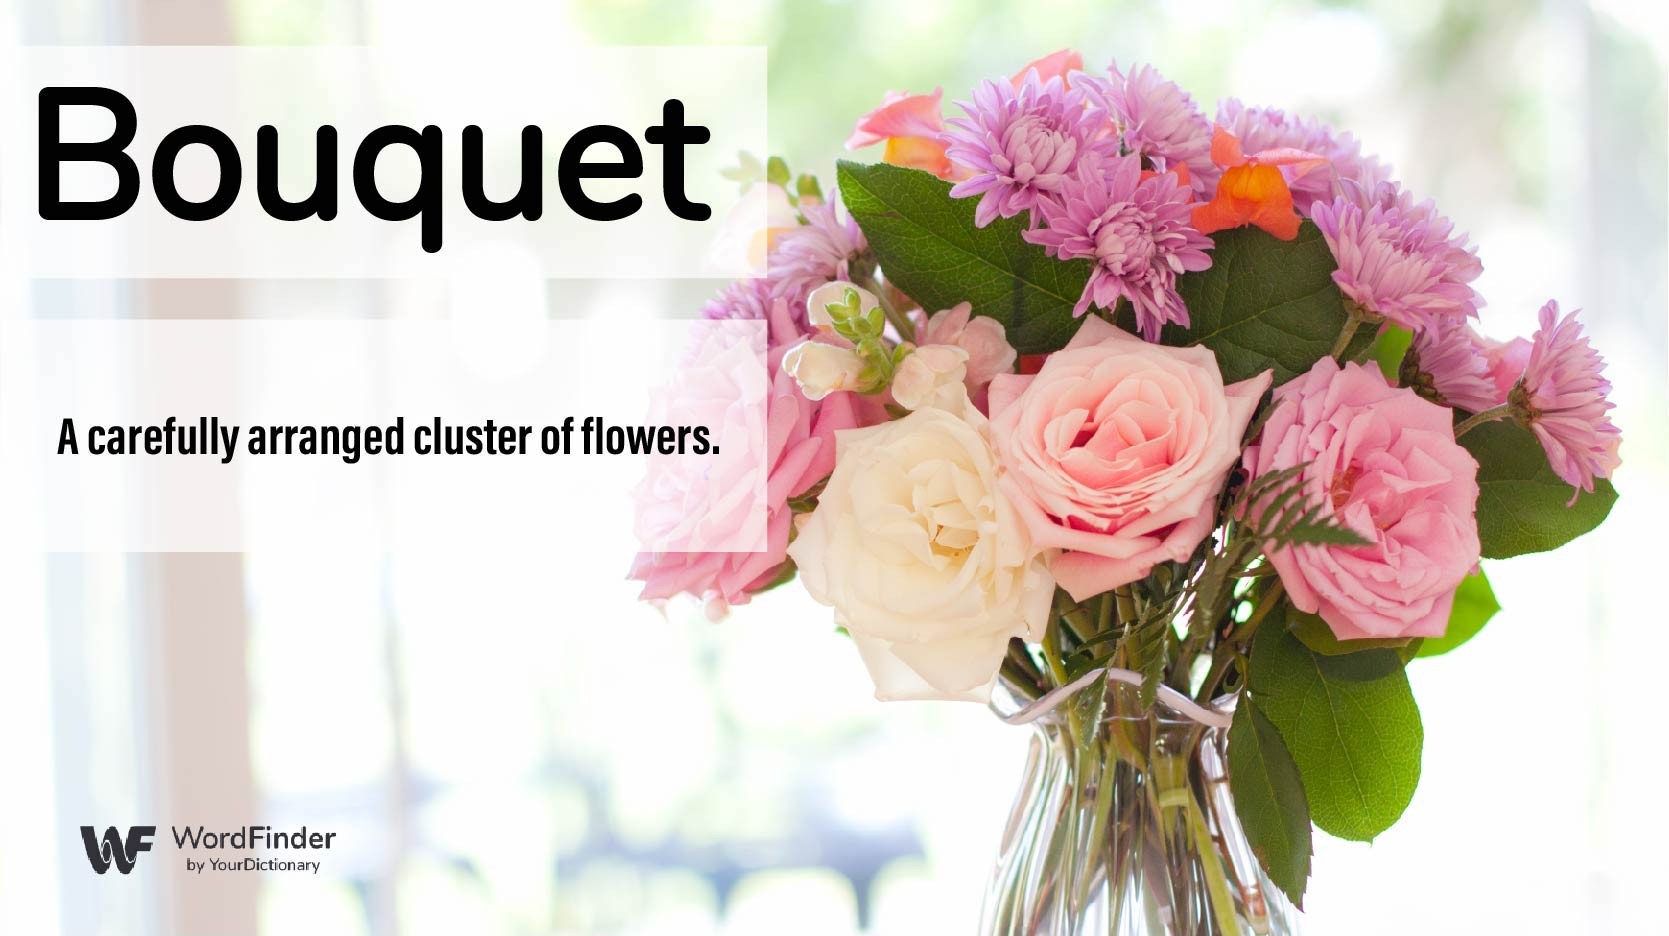 Bouquet definition with visual